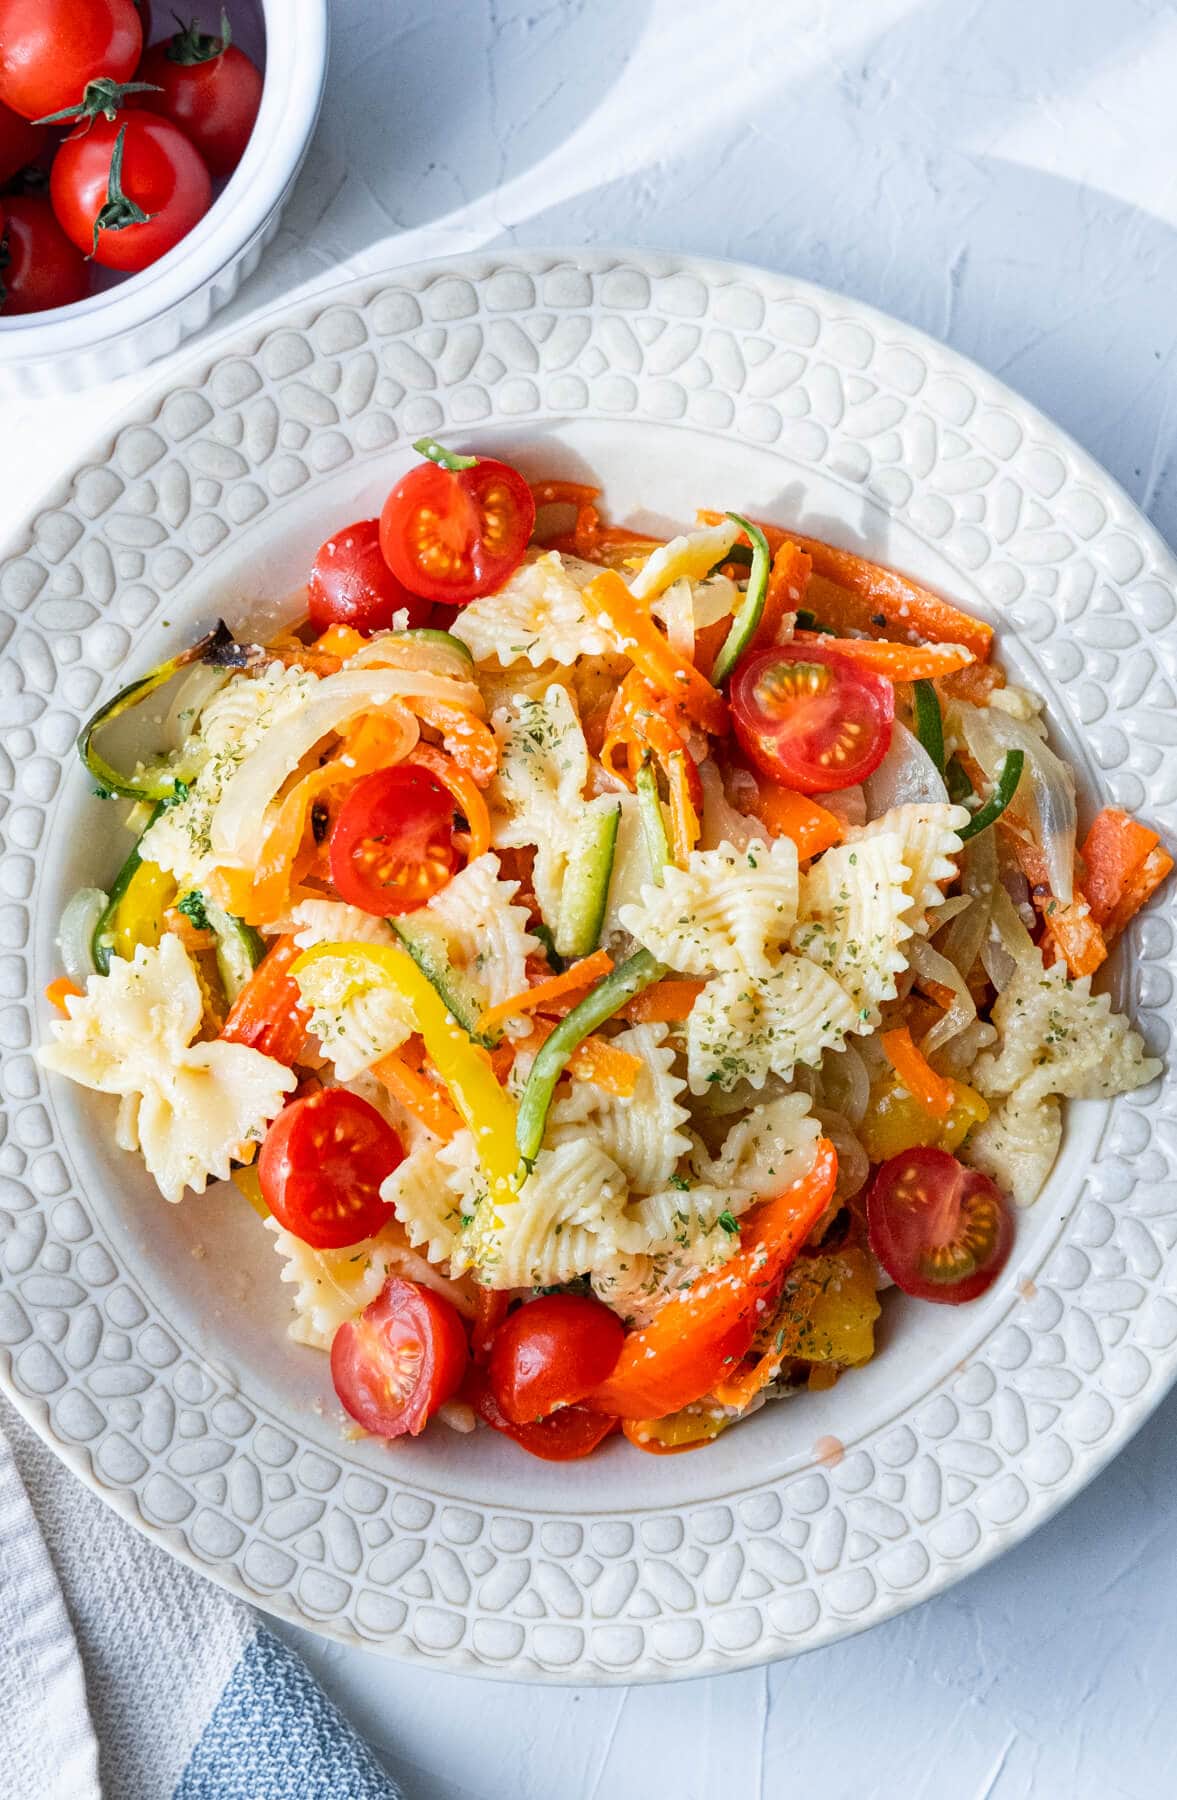 Baked carrot slices, zucchini, onion, bell peppers tossed together with farfalle pasta and topped with dried Italian herbs and grated parmesan cheese. 